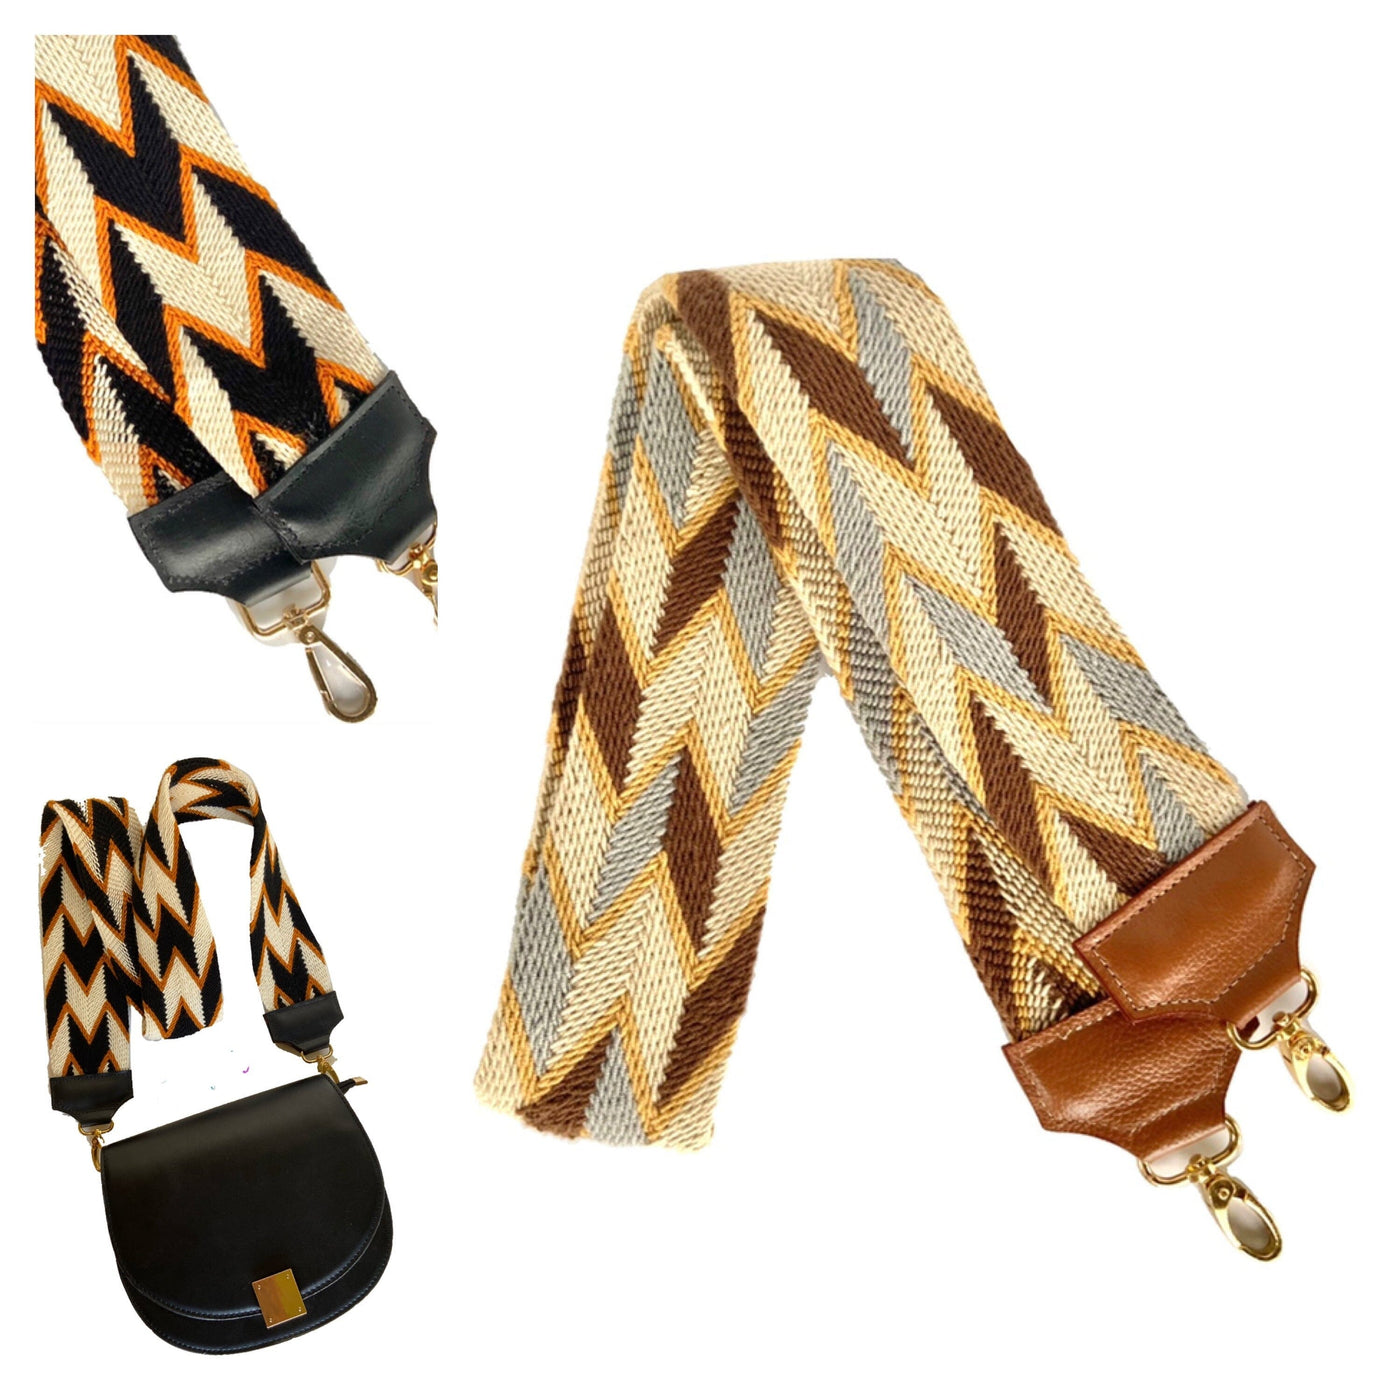 Neutral Bag Straps | Camera Strap |Strap Replacement |Woven Leather Straps 